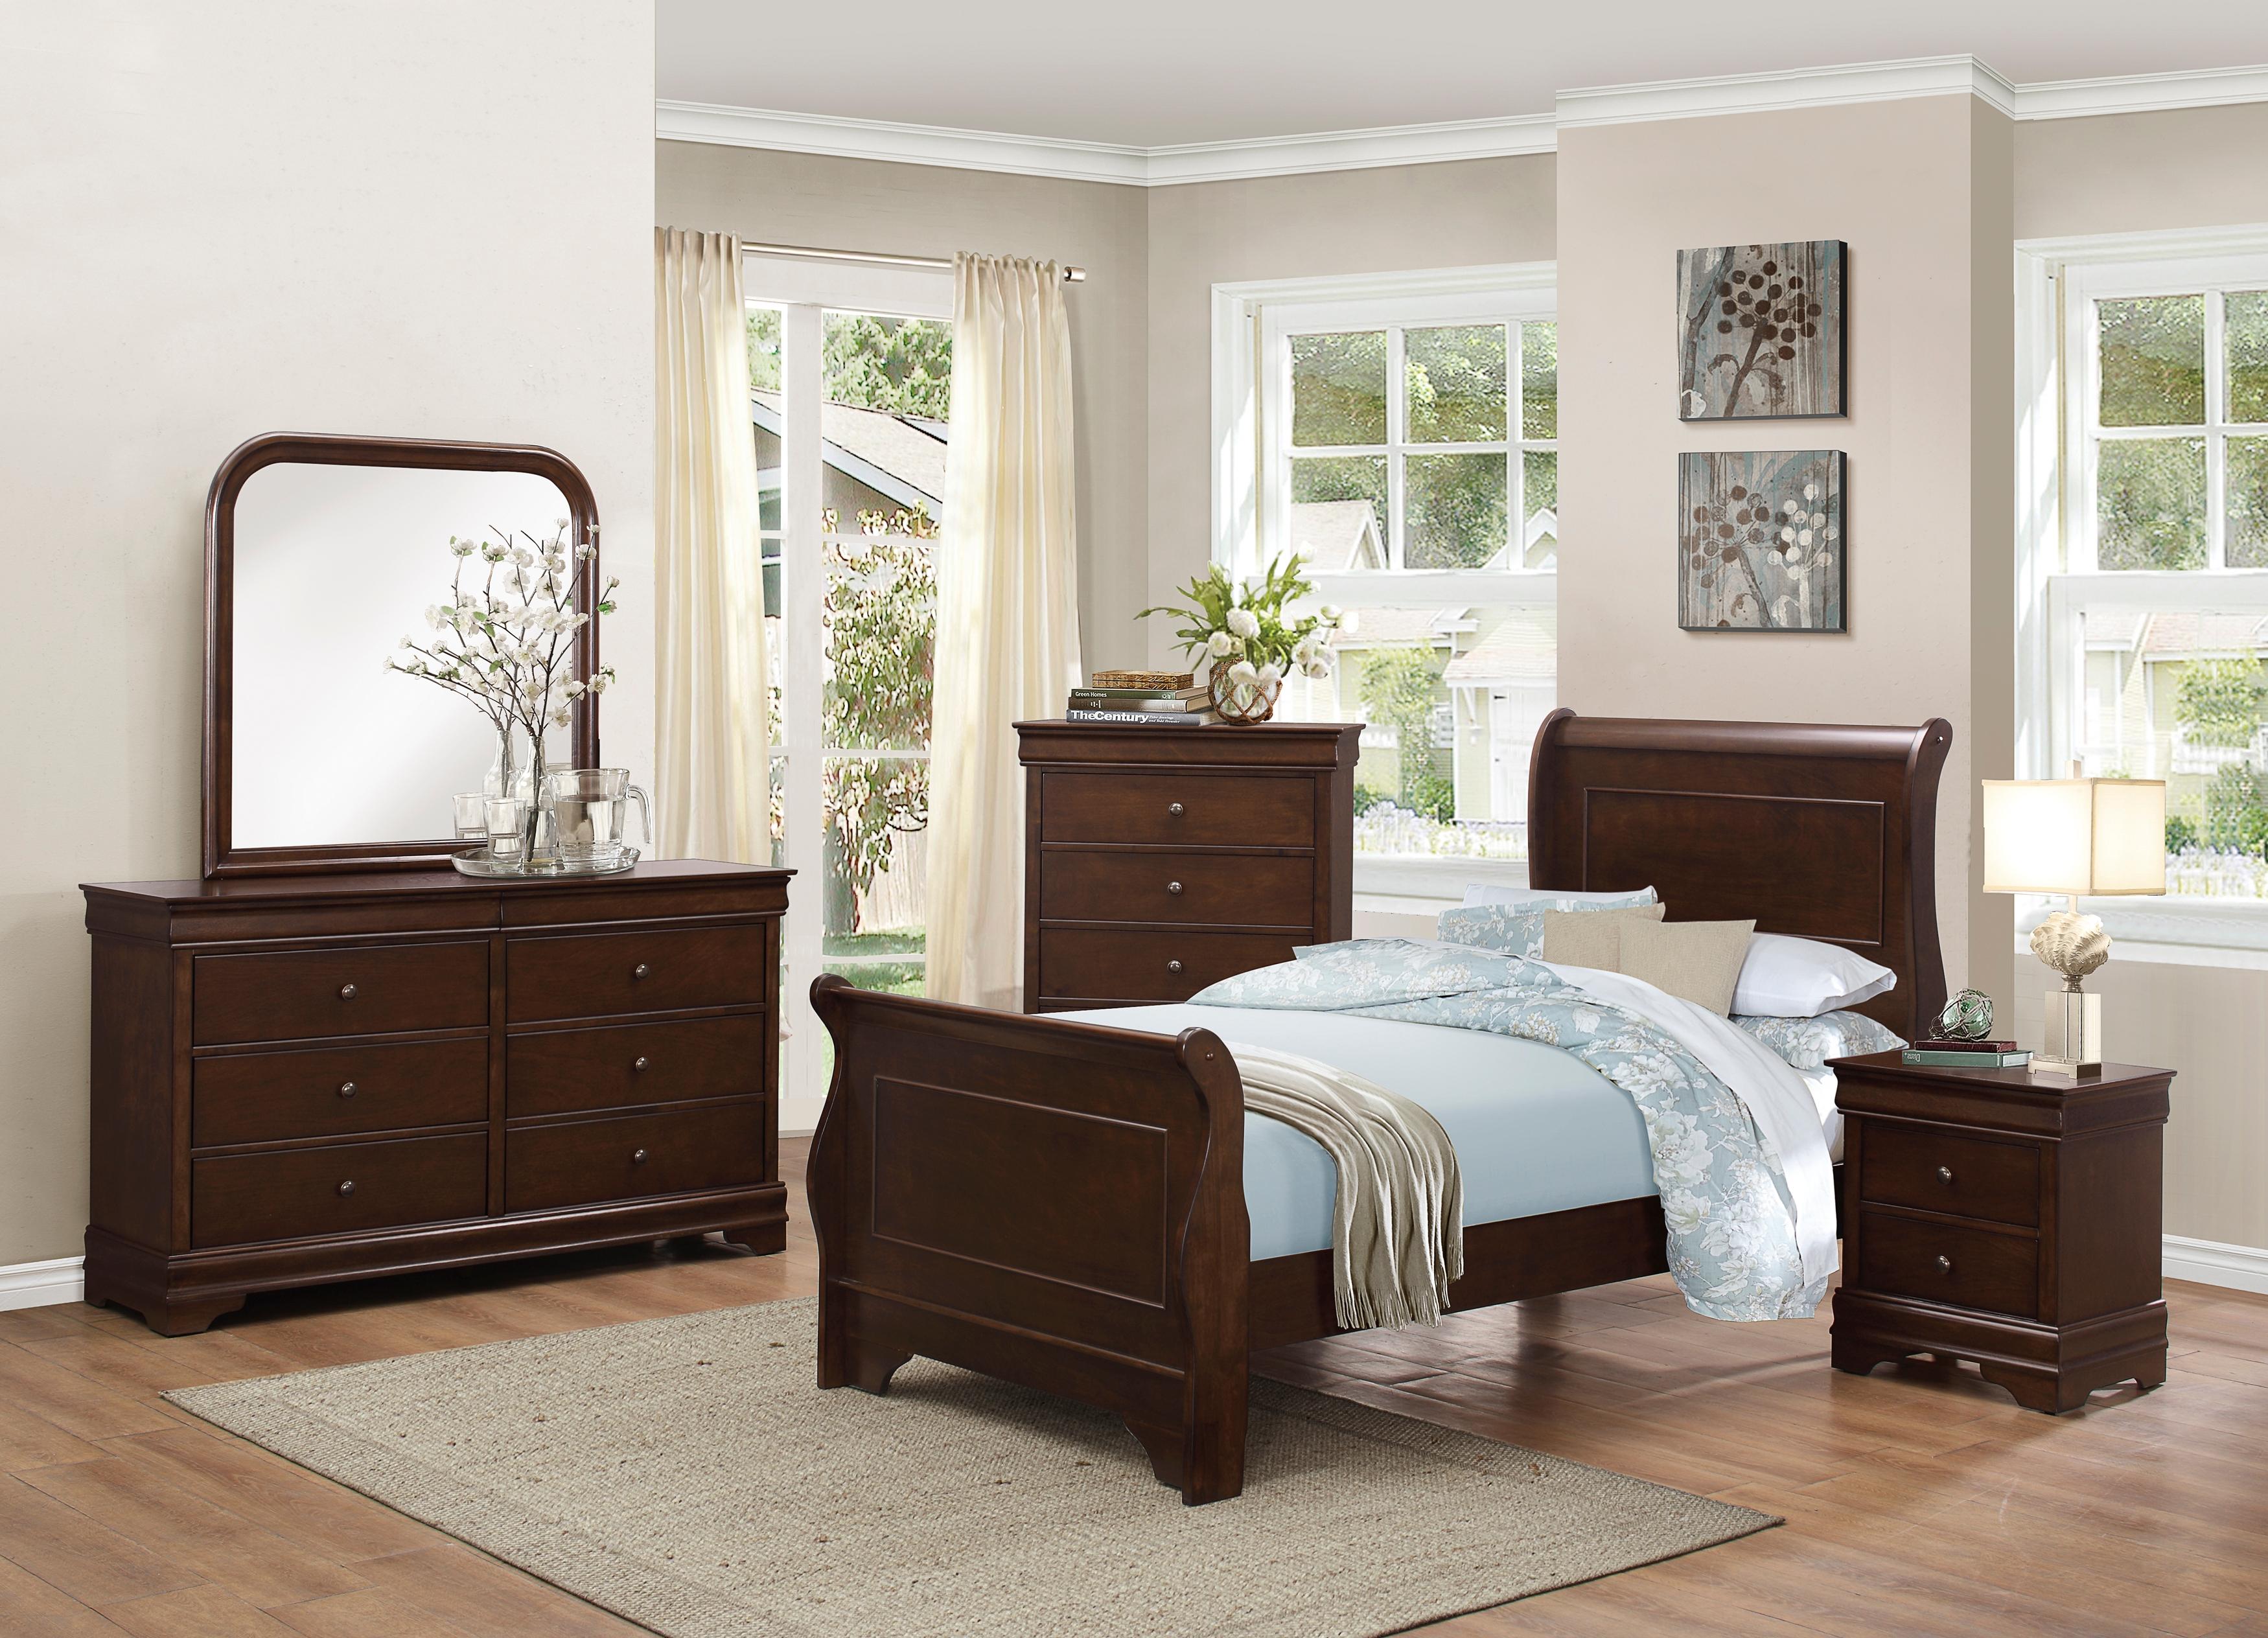 

    
Glam Brown Cherry Wood Twin Bedroom Set 5pcs Homelegance 1856T-1* Abbeville
